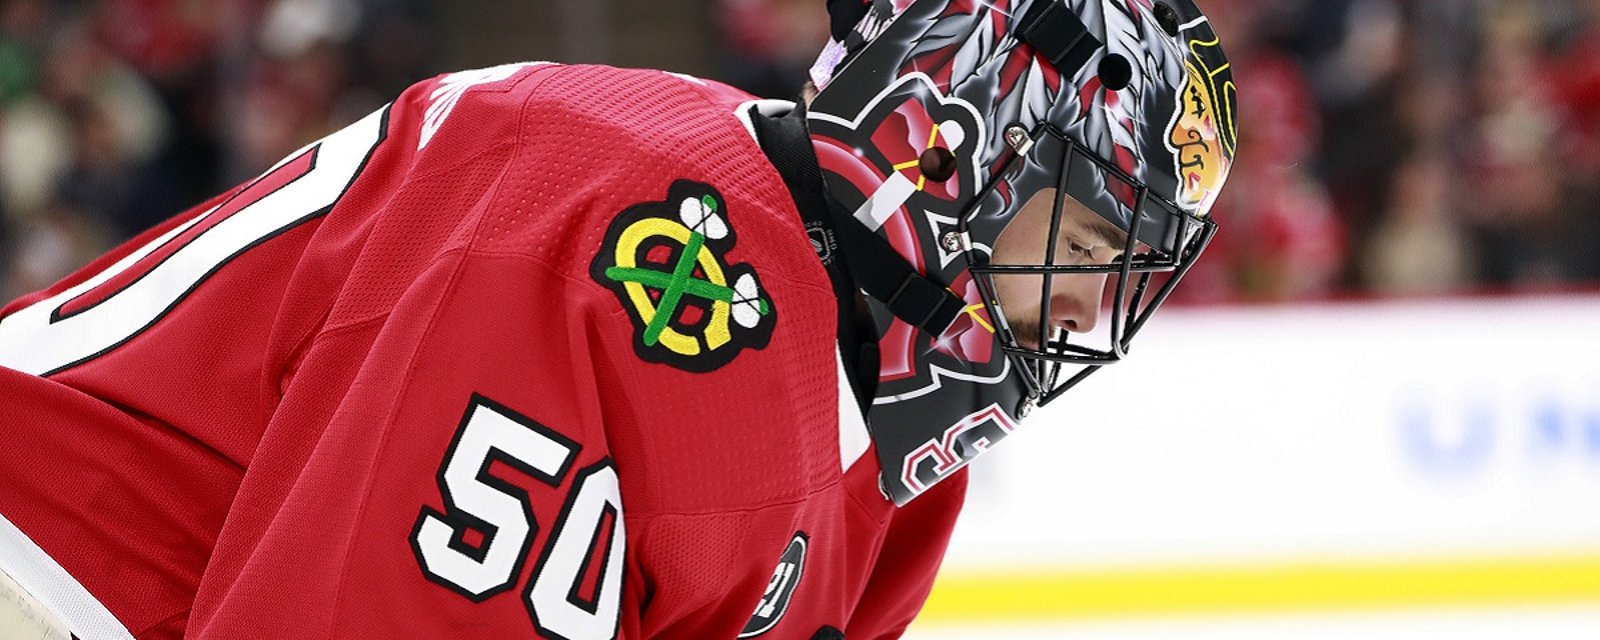 Corey Crawford expresses disappointment with the Blackhawks.